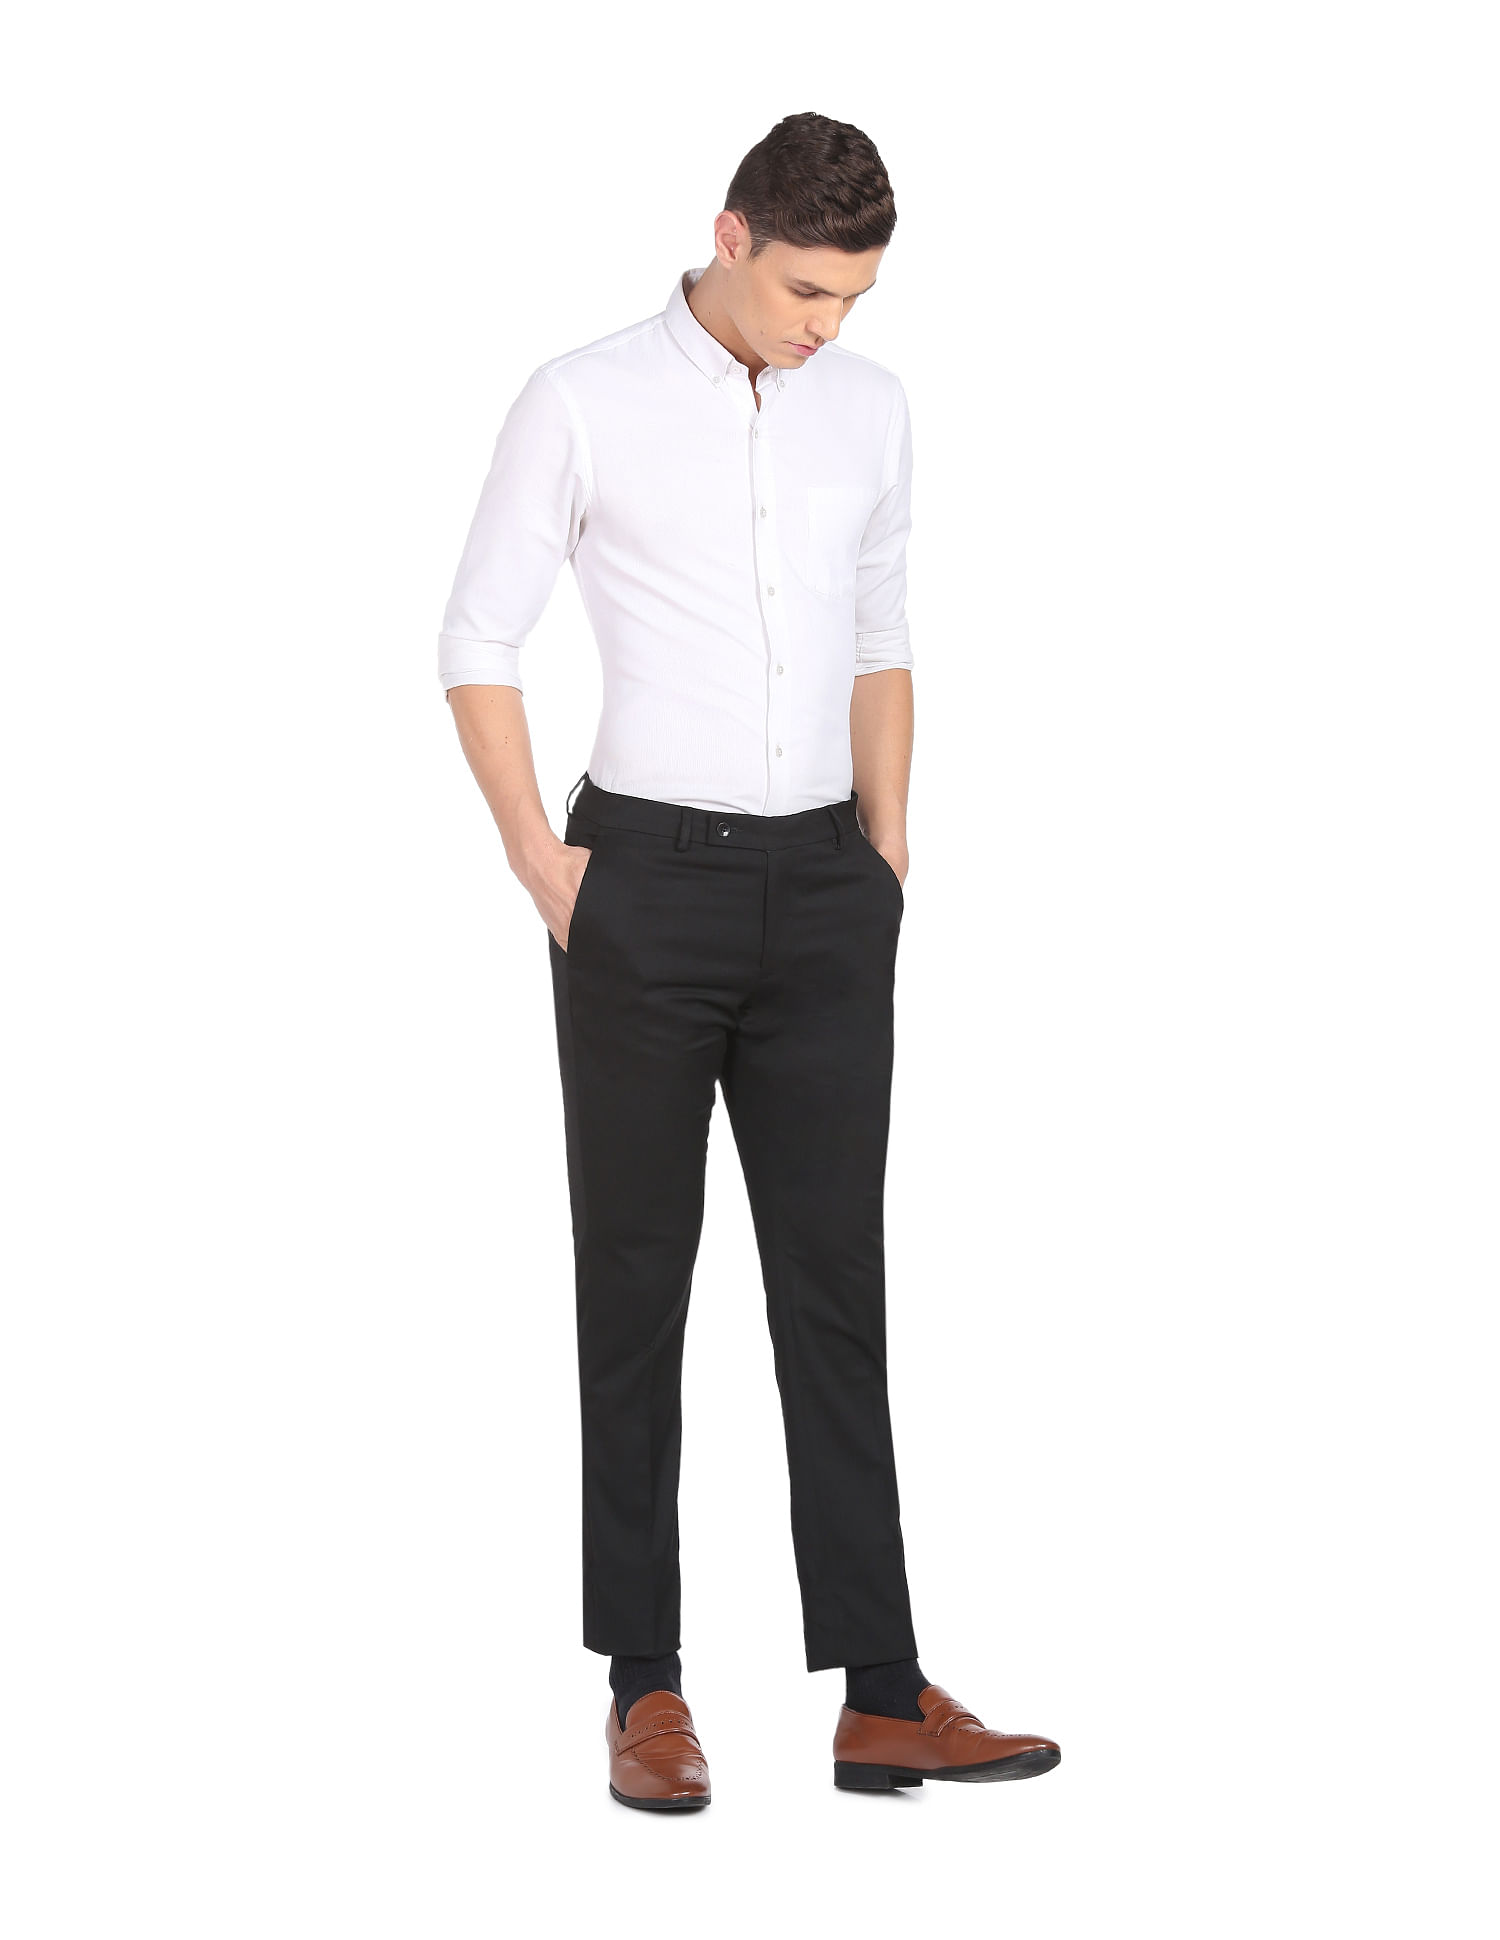 Made Suits® Sartorial Tailor — High-Waisted Trousers Flatter Every Men -  Should you wear high waisted trousers?